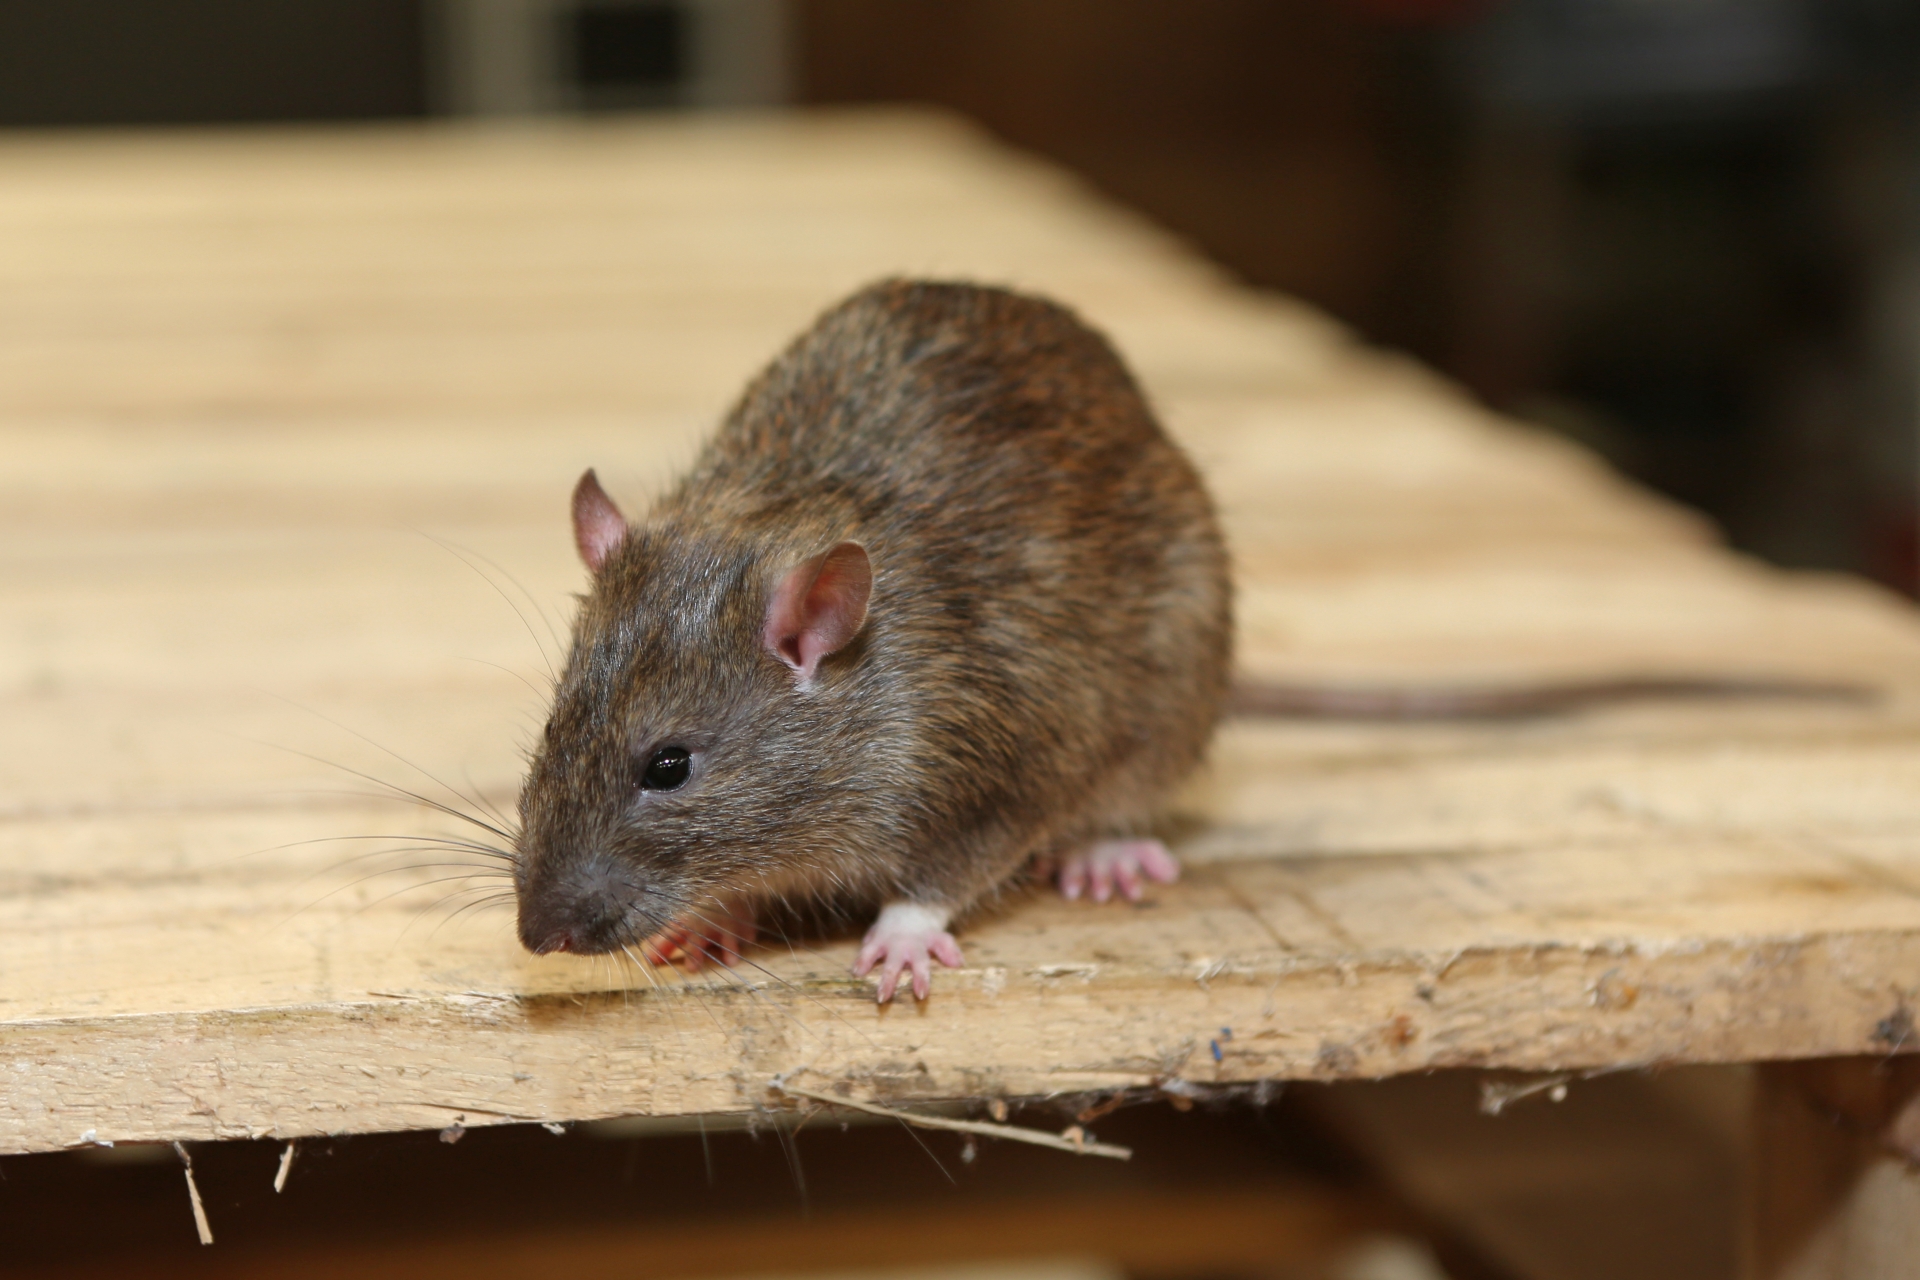 Rat Infestation, Pest Control in Molesey, East Molesey, West Molesey, KT8. Call Now 020 8166 9746